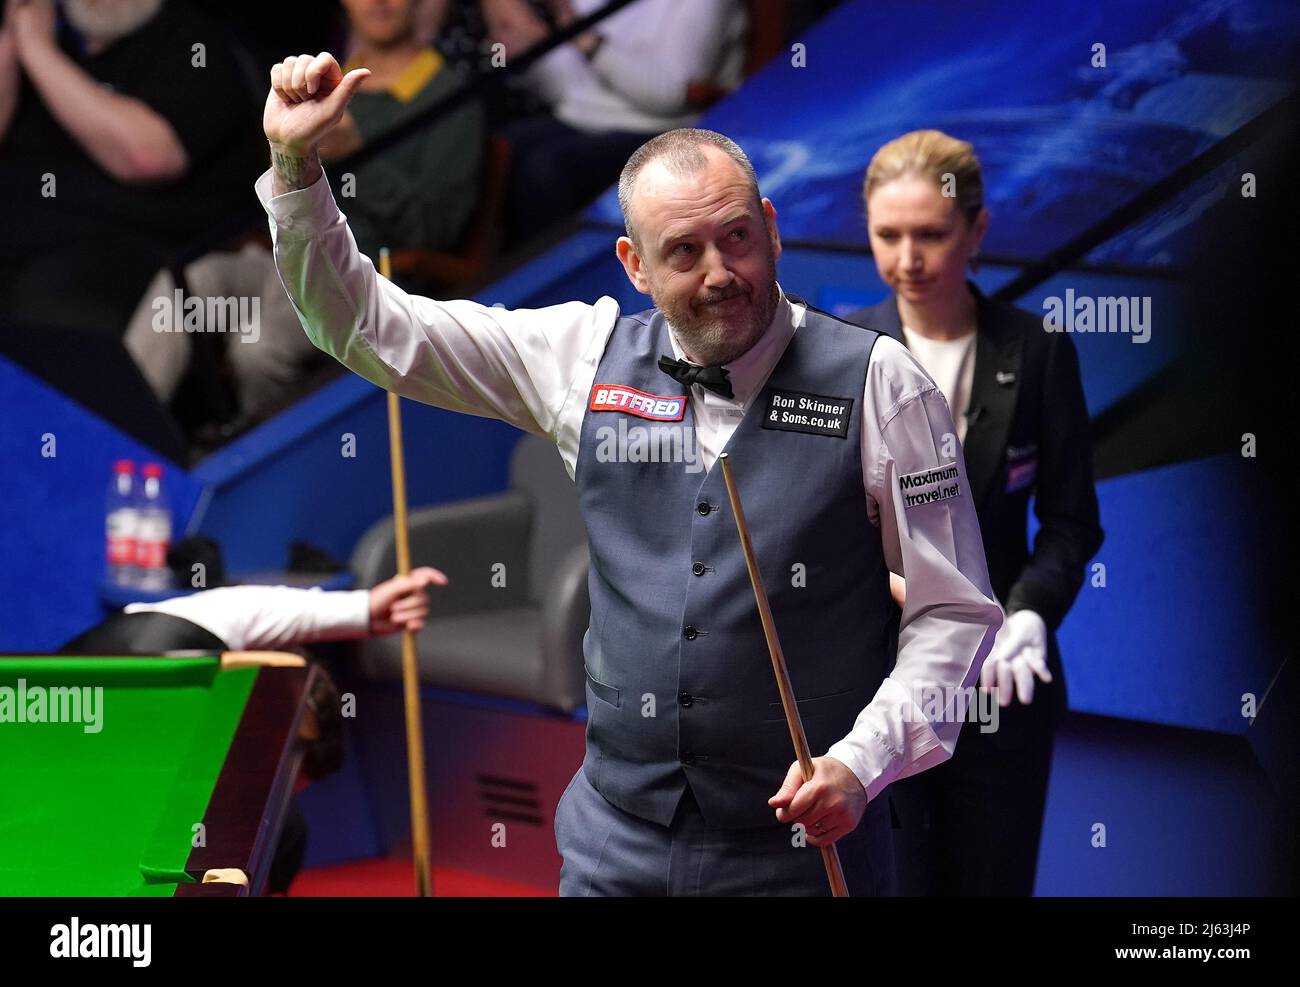 Mark Williams waves to the crowd after winning his quarter-final match against Yan Bingtao, during day twelve of the Betfred World Snooker Championship at The Crucible, Sheffield